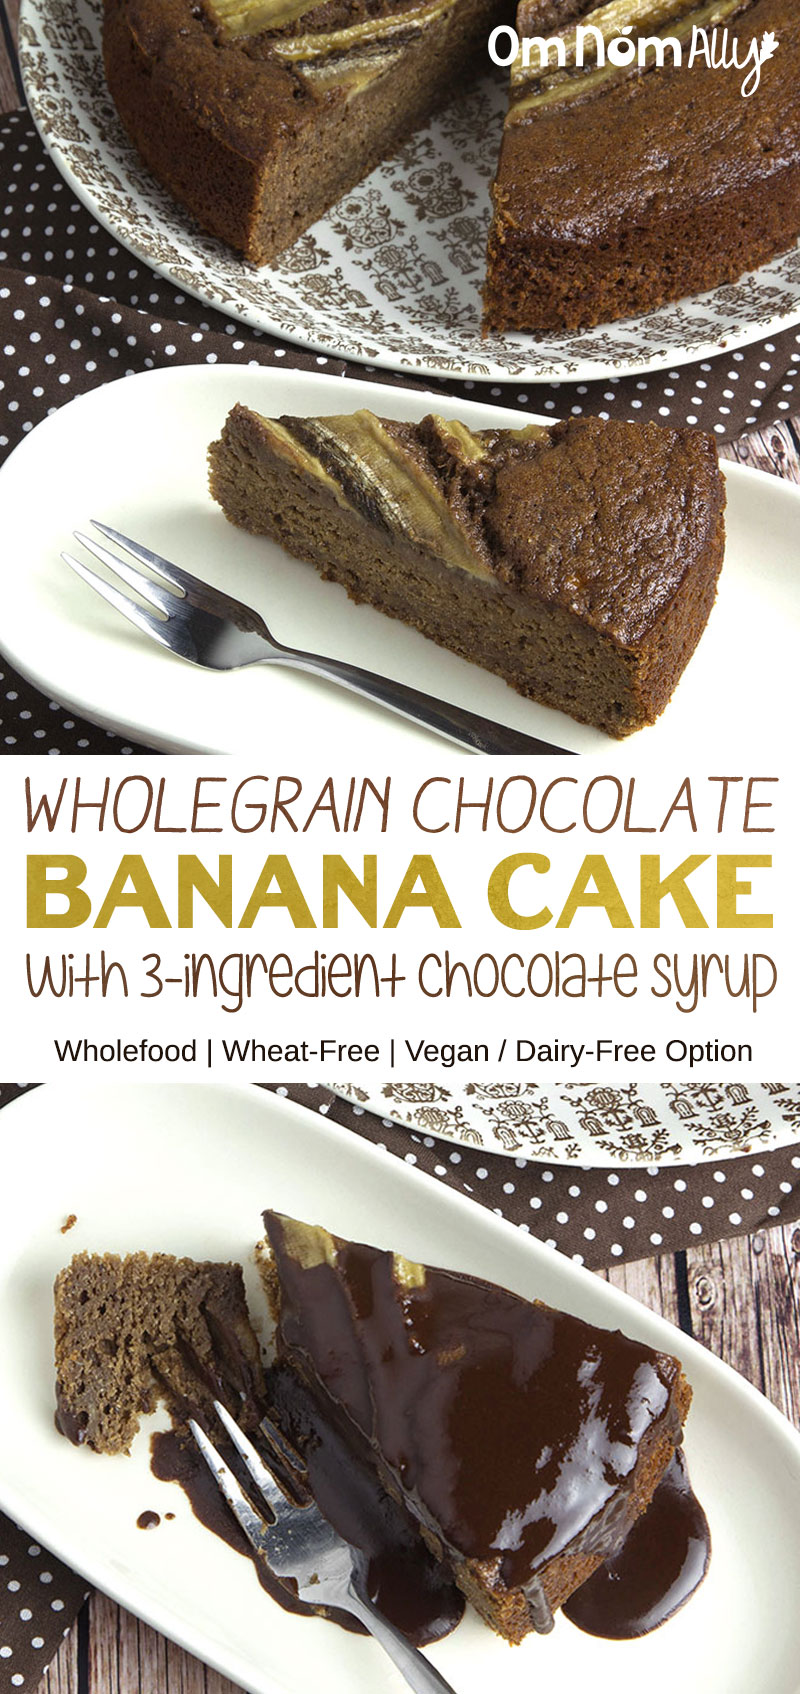 Wholegrain Chocolate Banana Cake with 3-Ingredient Chocolate Syrup @OmNomAlly | This Chocolate Banana Cake is dense, moist and fudgy thanks to the addition of mashed banana, with the amazing flavour of real banana and chocolate infused in every crumb.